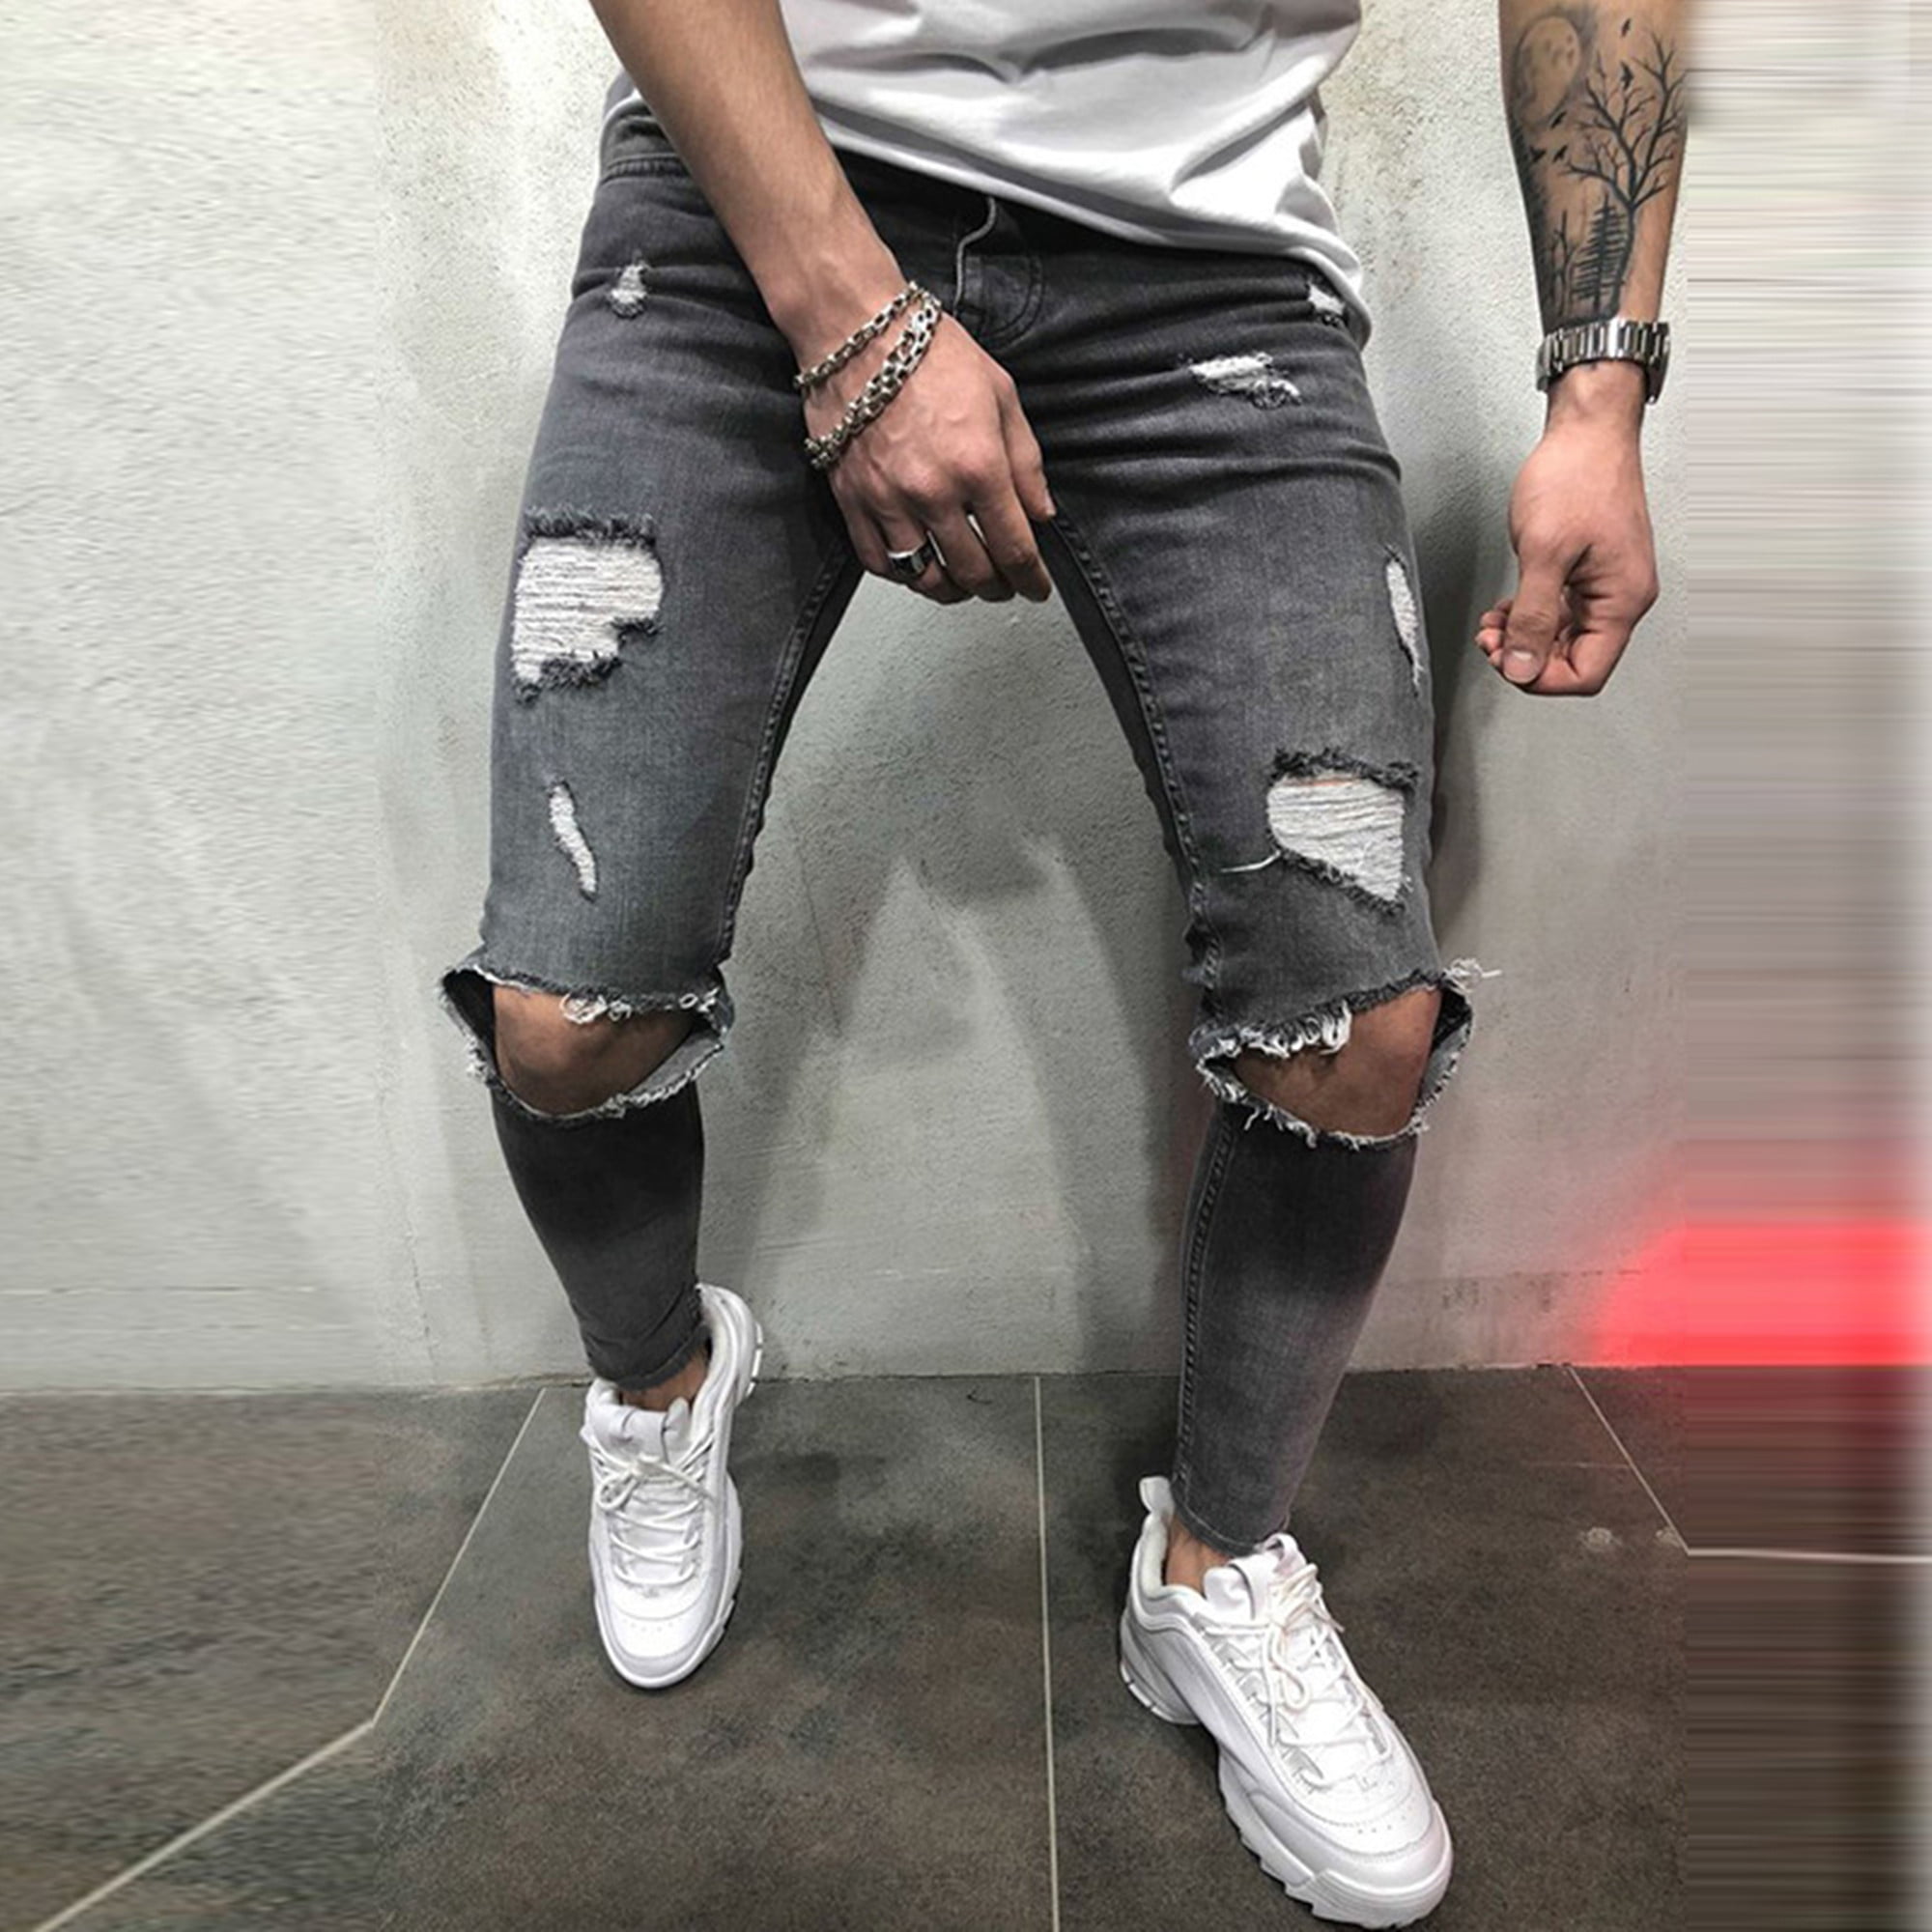 Men Casual Knee Hole Denim Pants Flared Bootcut Ripped Jeans Trousers Loose  Thin | eBay